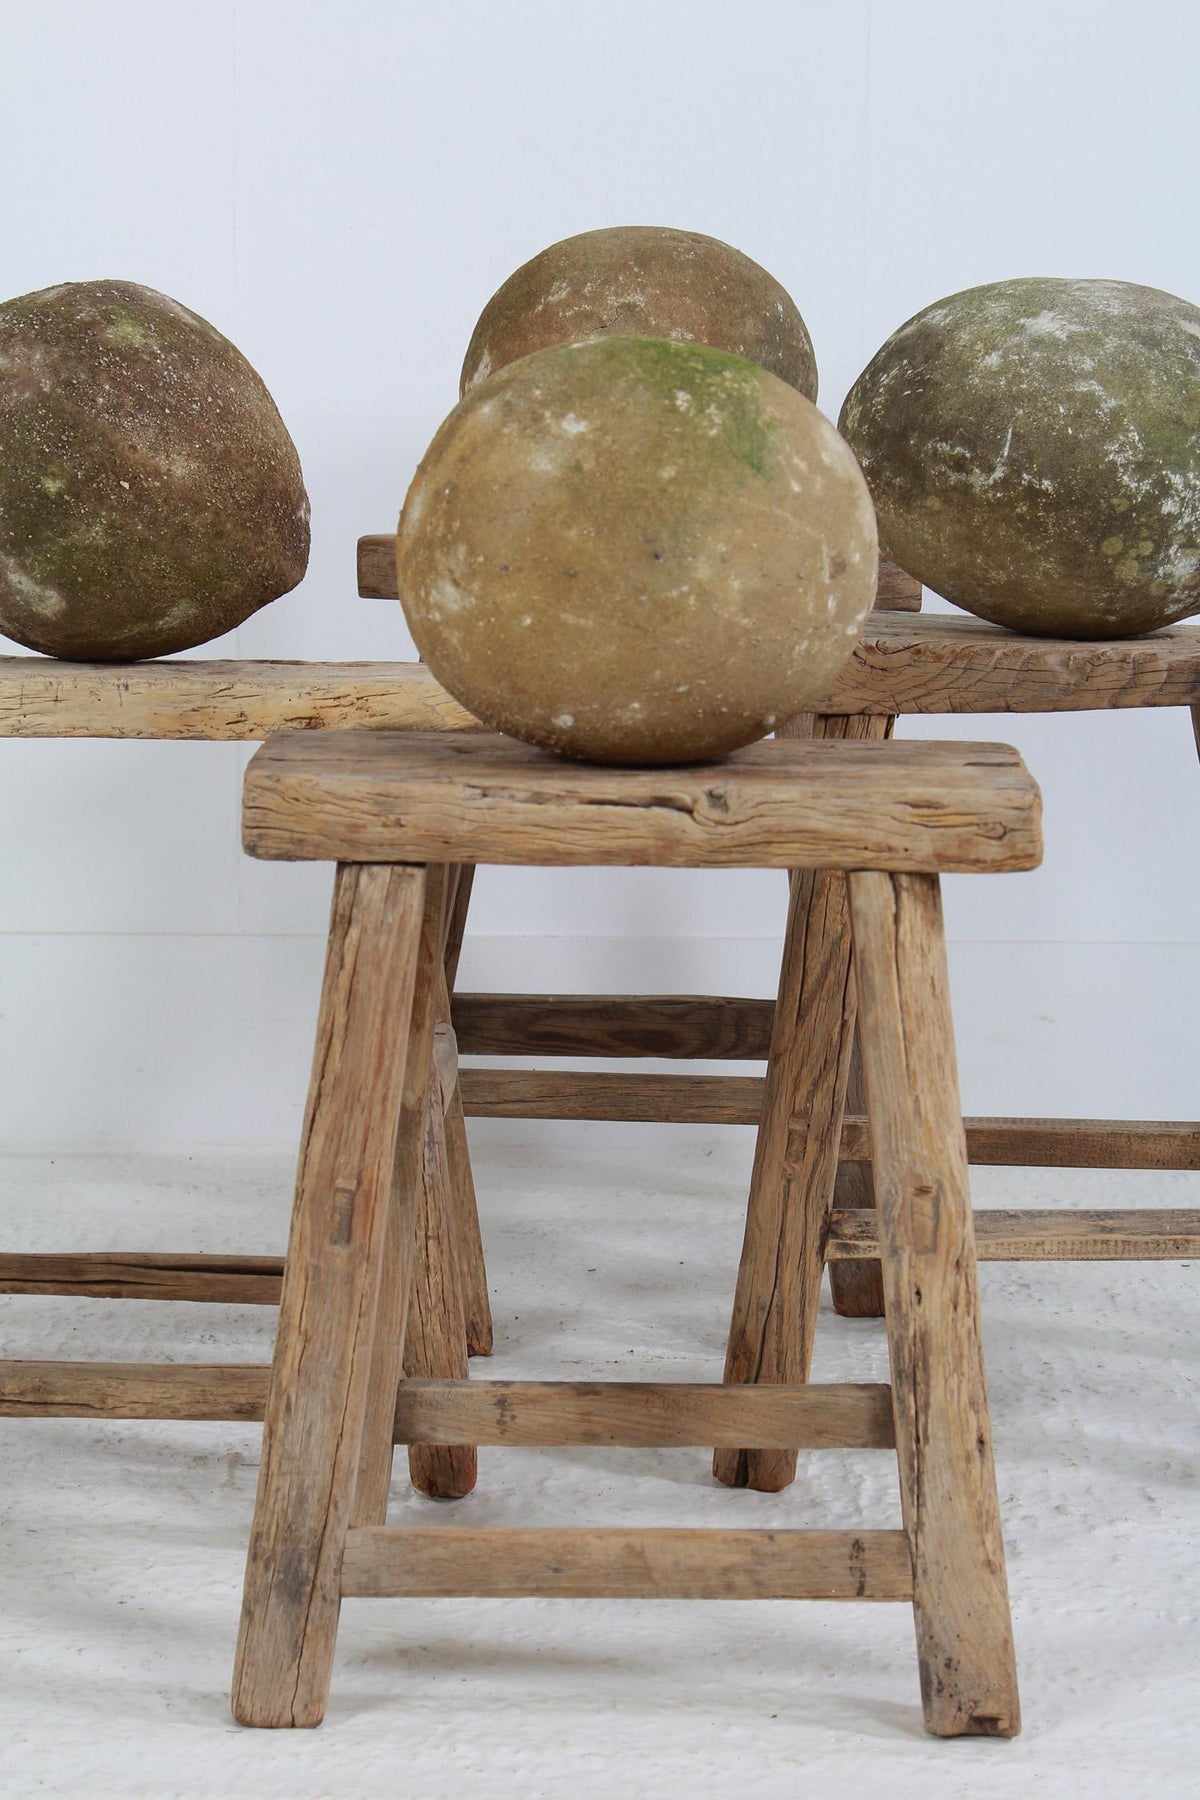 Set of Four Ancient French Architectural Carved Stone Balls